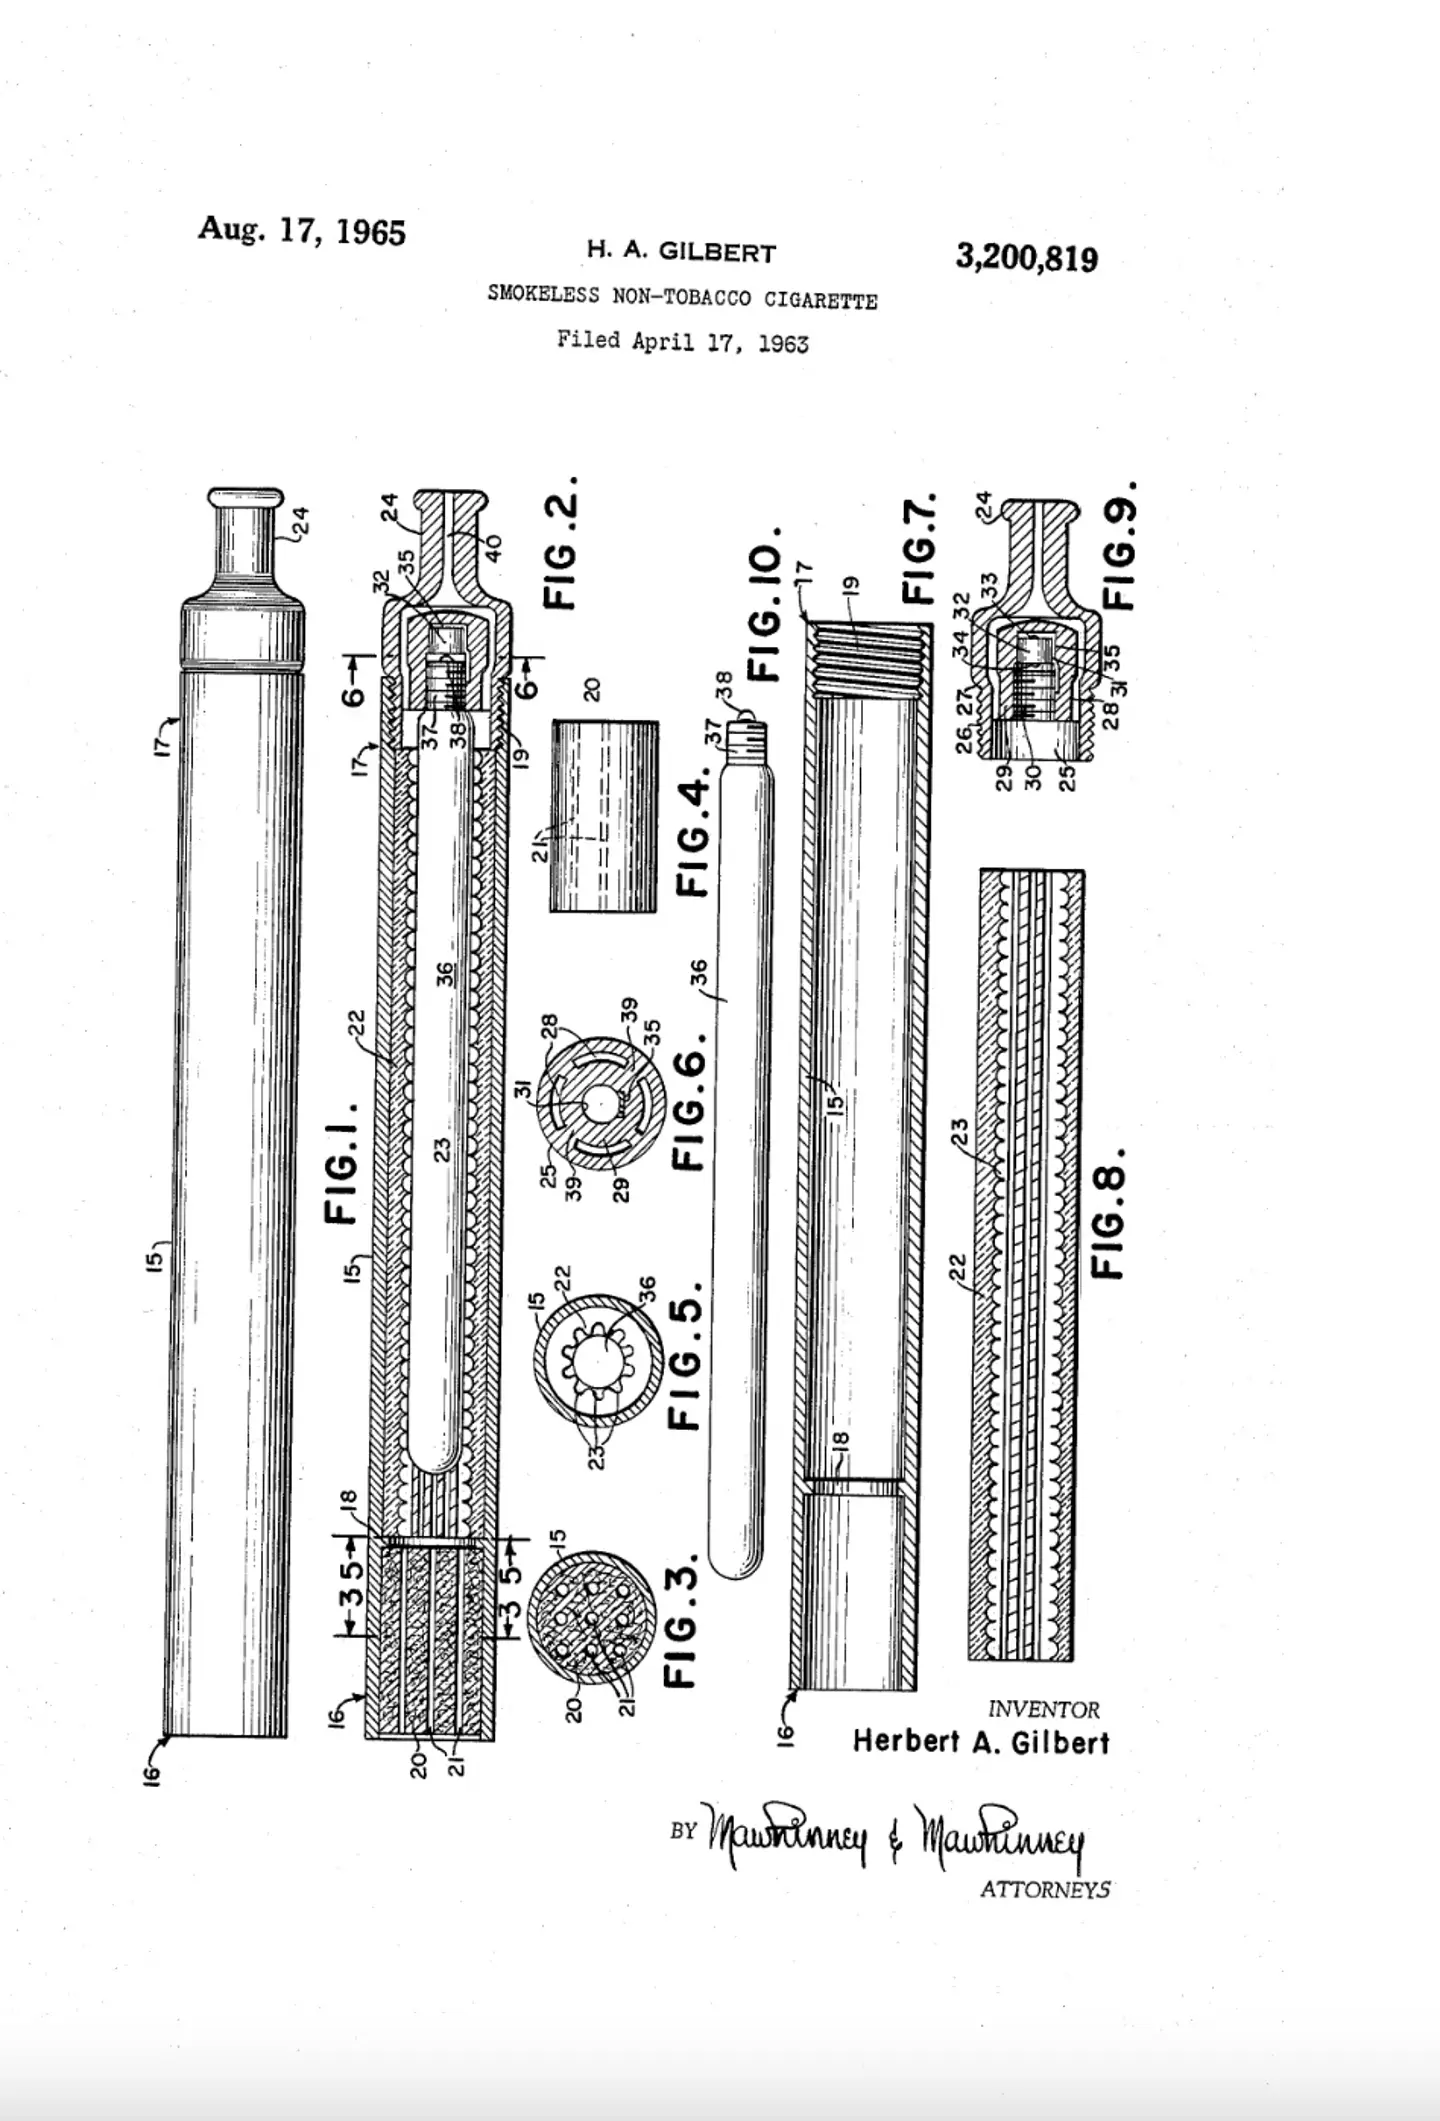 Herbert A. Gilbert received a patent and created prototypes which most closely resembles e-cigs of today.